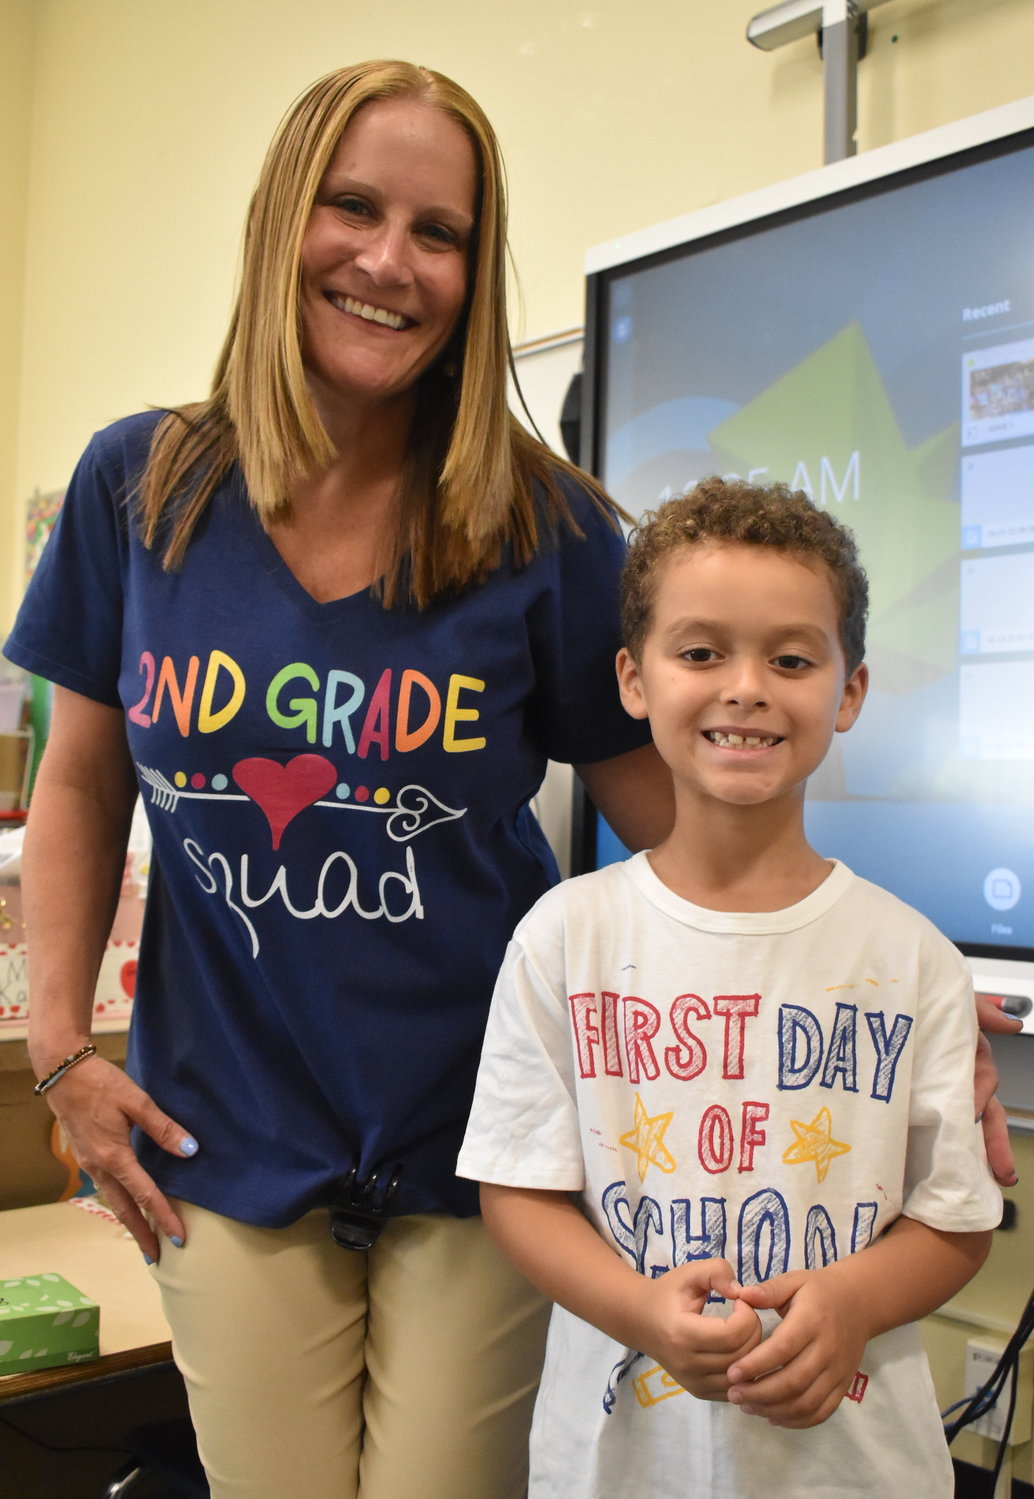 Second grade teacher Jennifer Kafka and student Jace Garci made sure to start the year off in style.